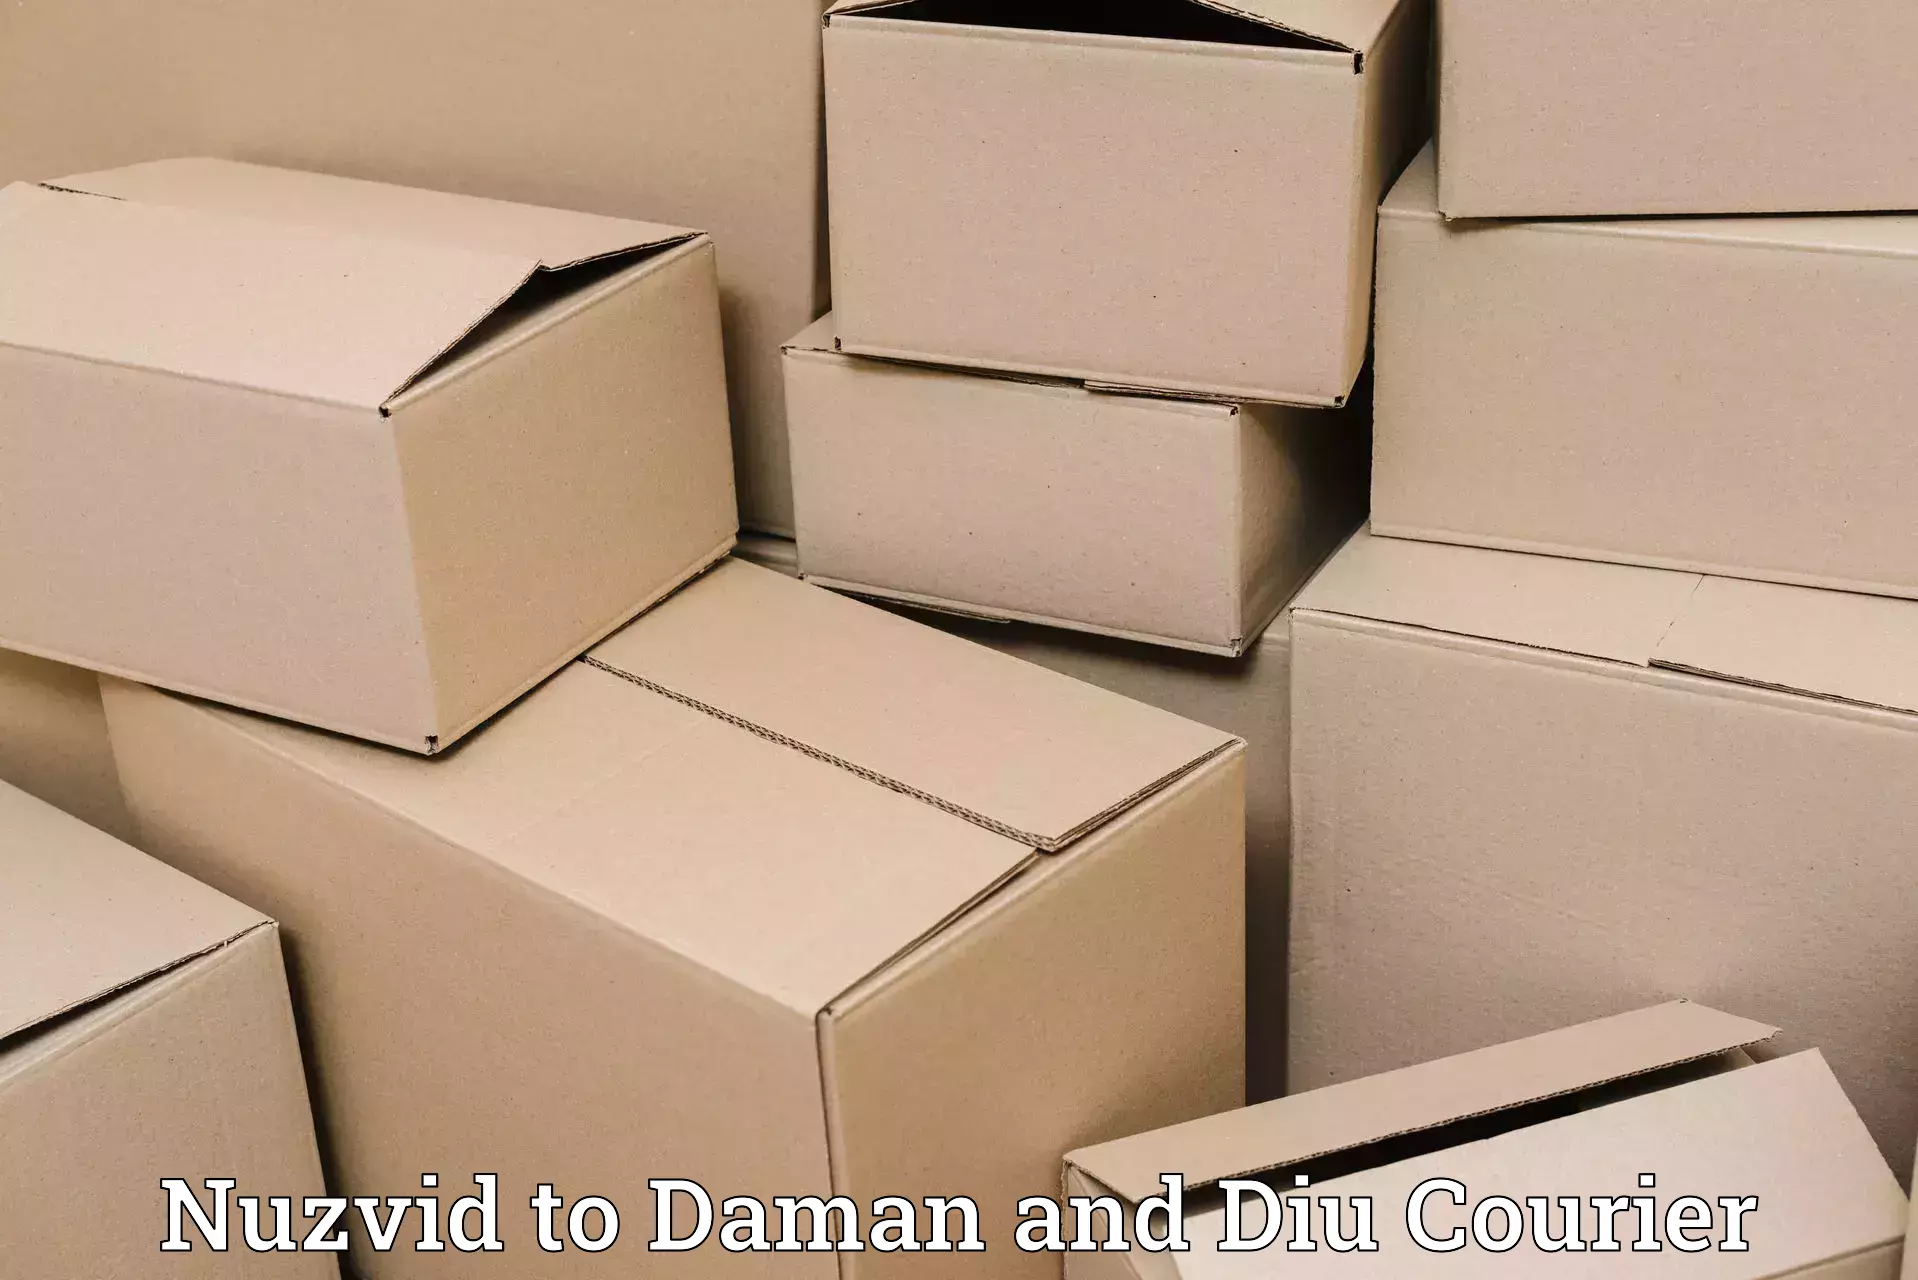 Courier service comparison Nuzvid to Daman and Diu